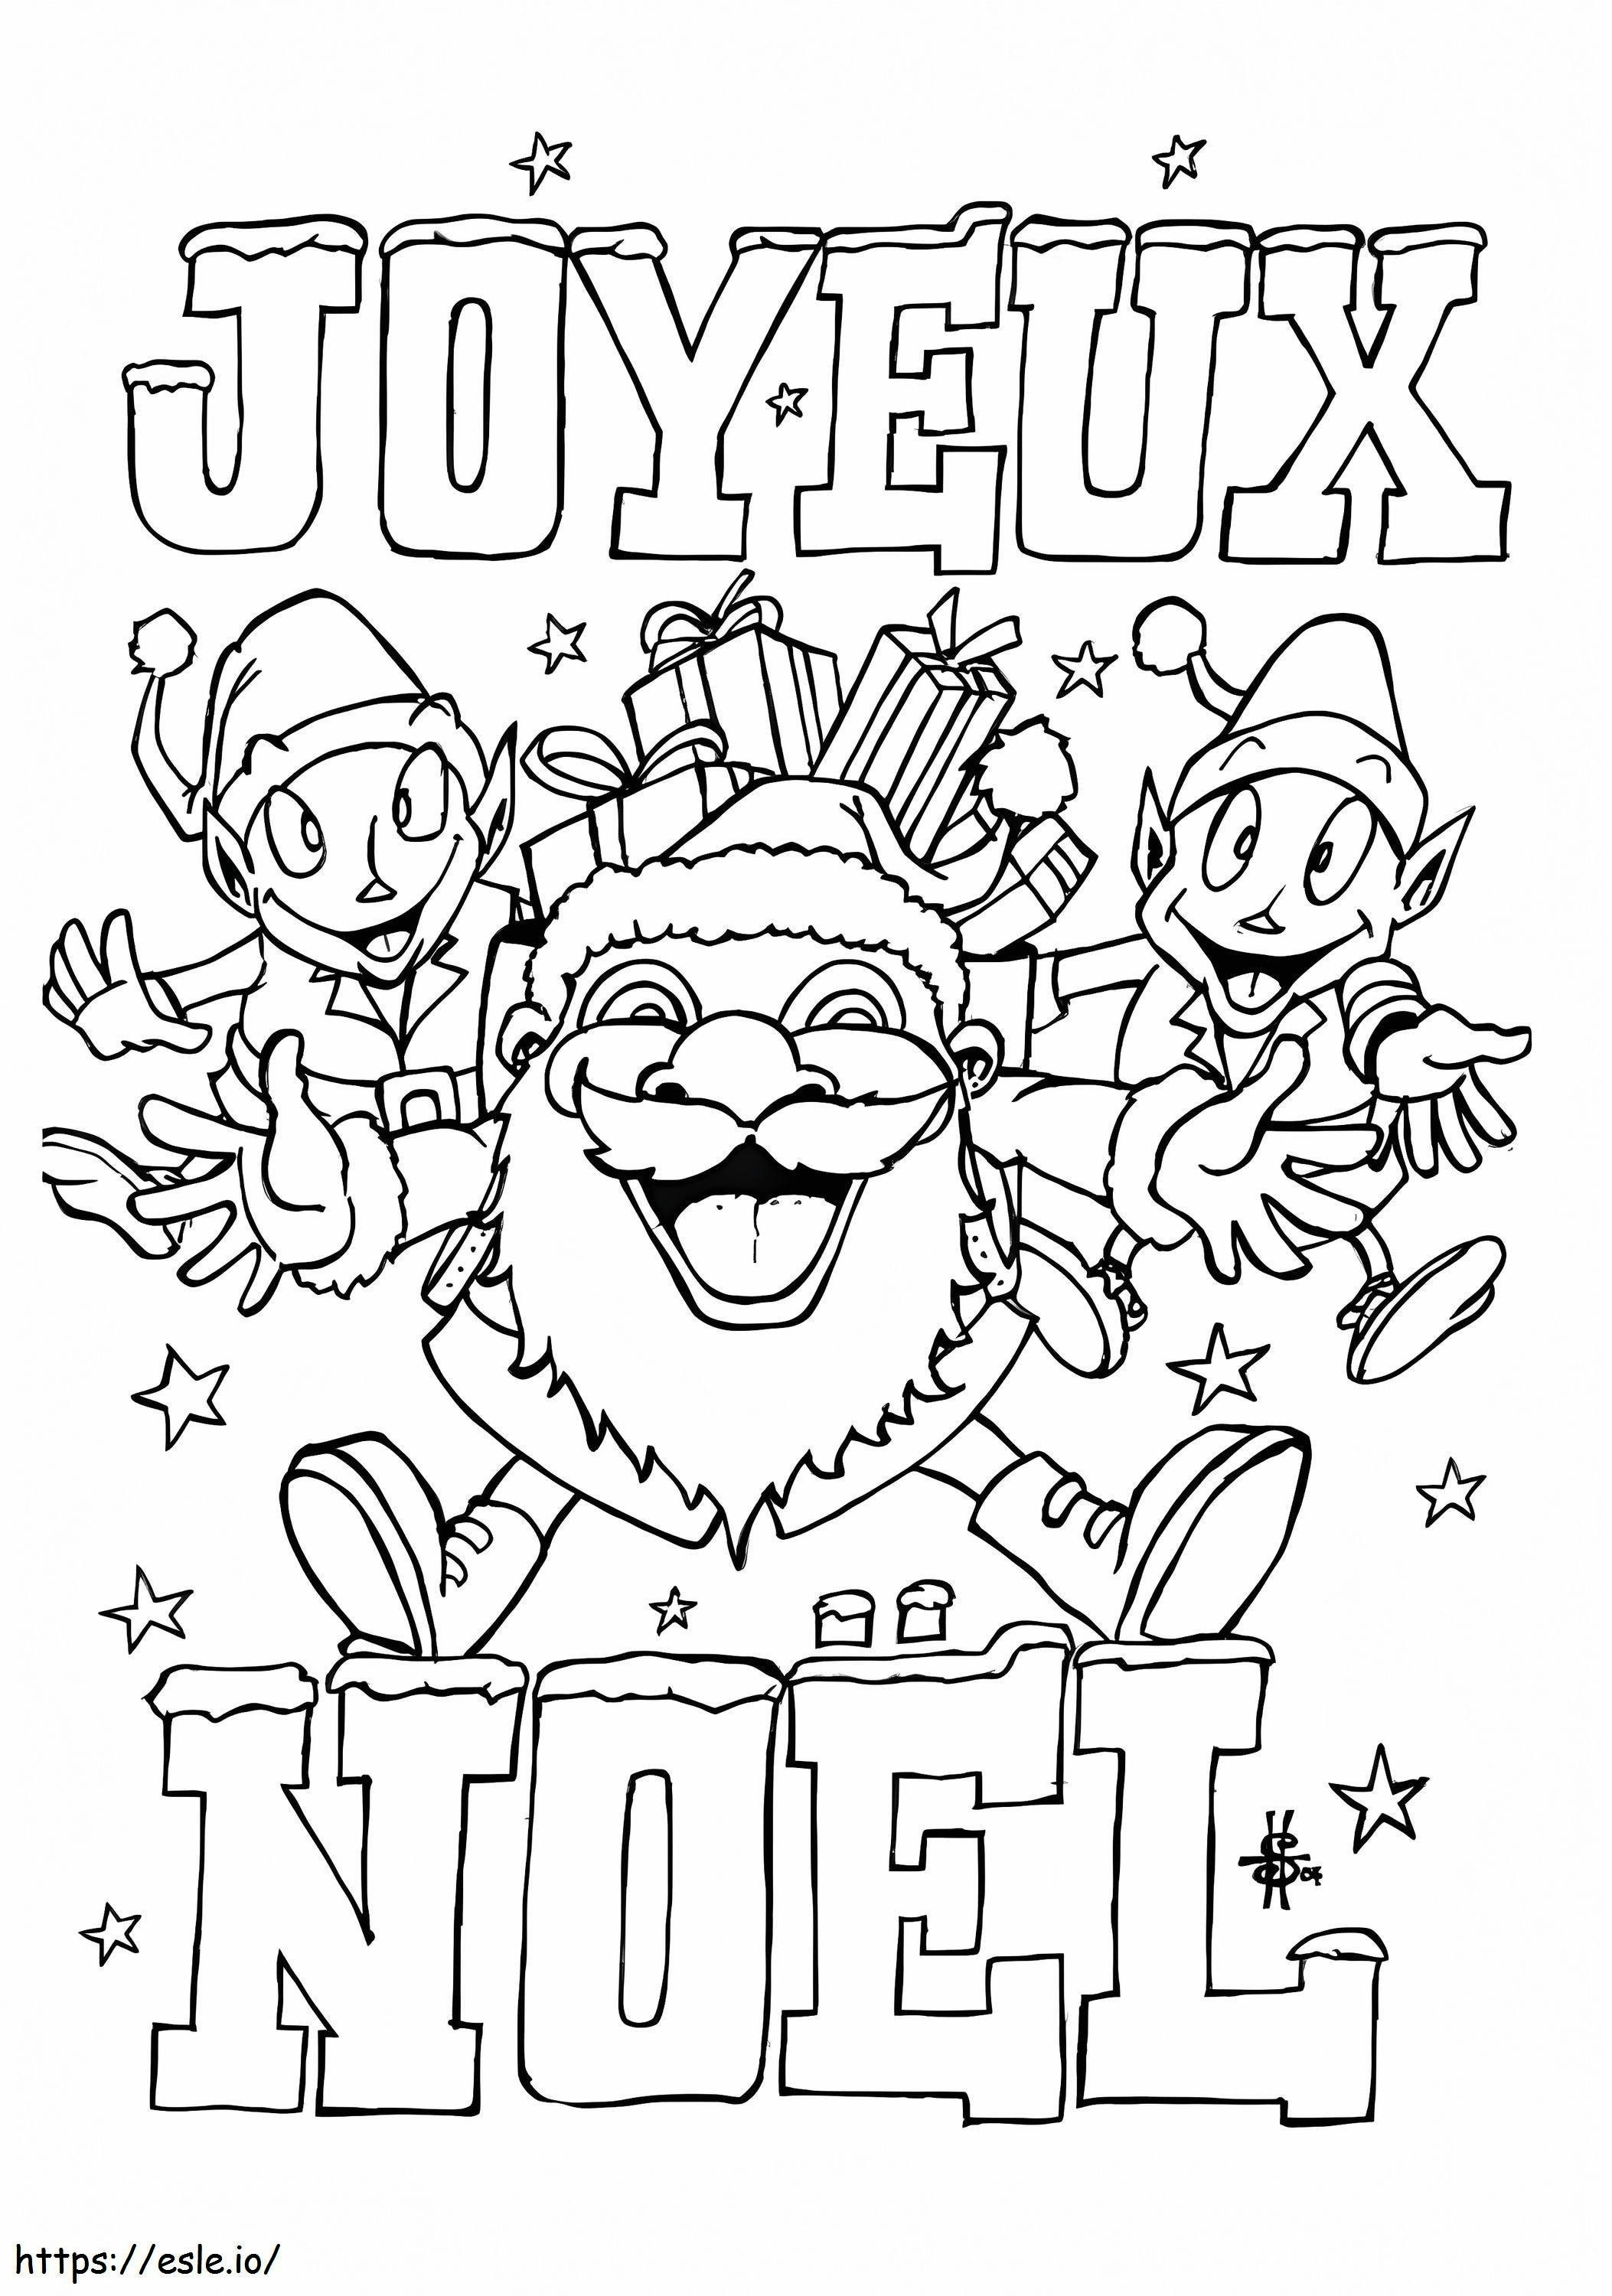 Merry Christmas 1 coloring page